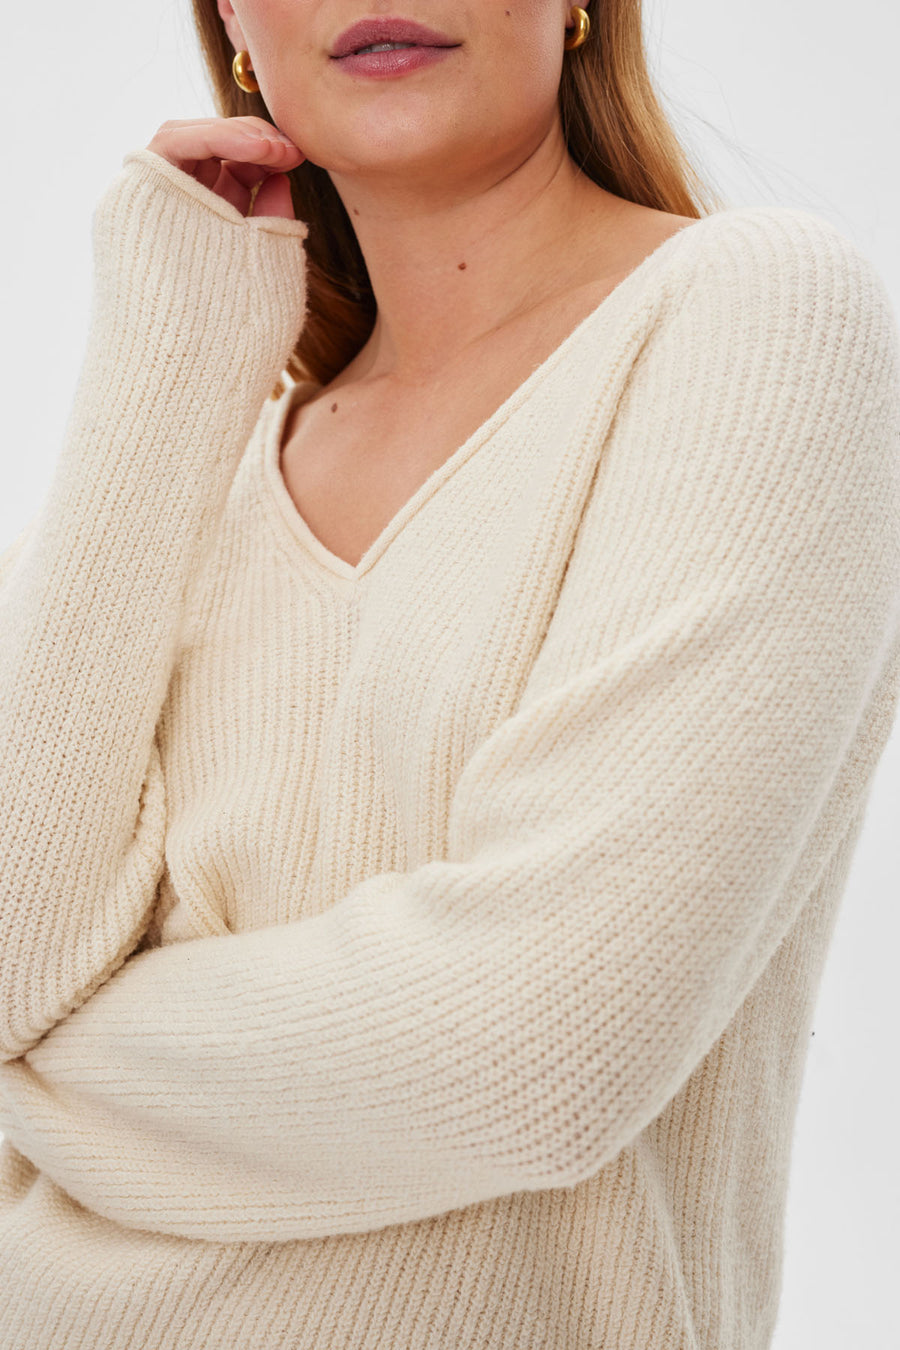 FQRING - KNITTED PULLOVER WITH V-NECK - WHITE